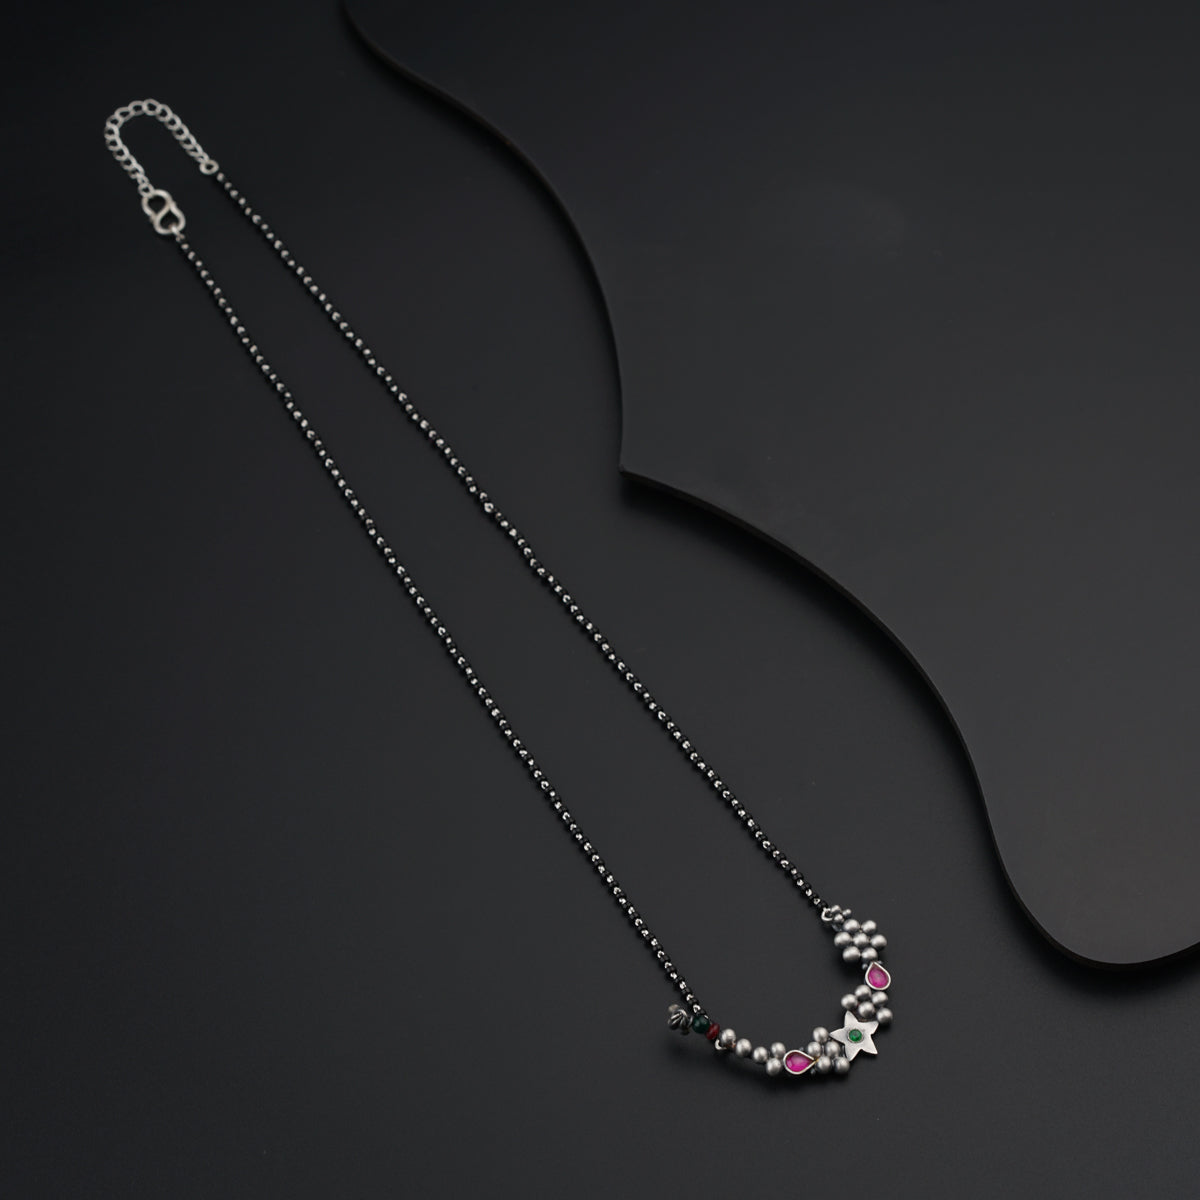 a black necklace with a silver chain and pink stones